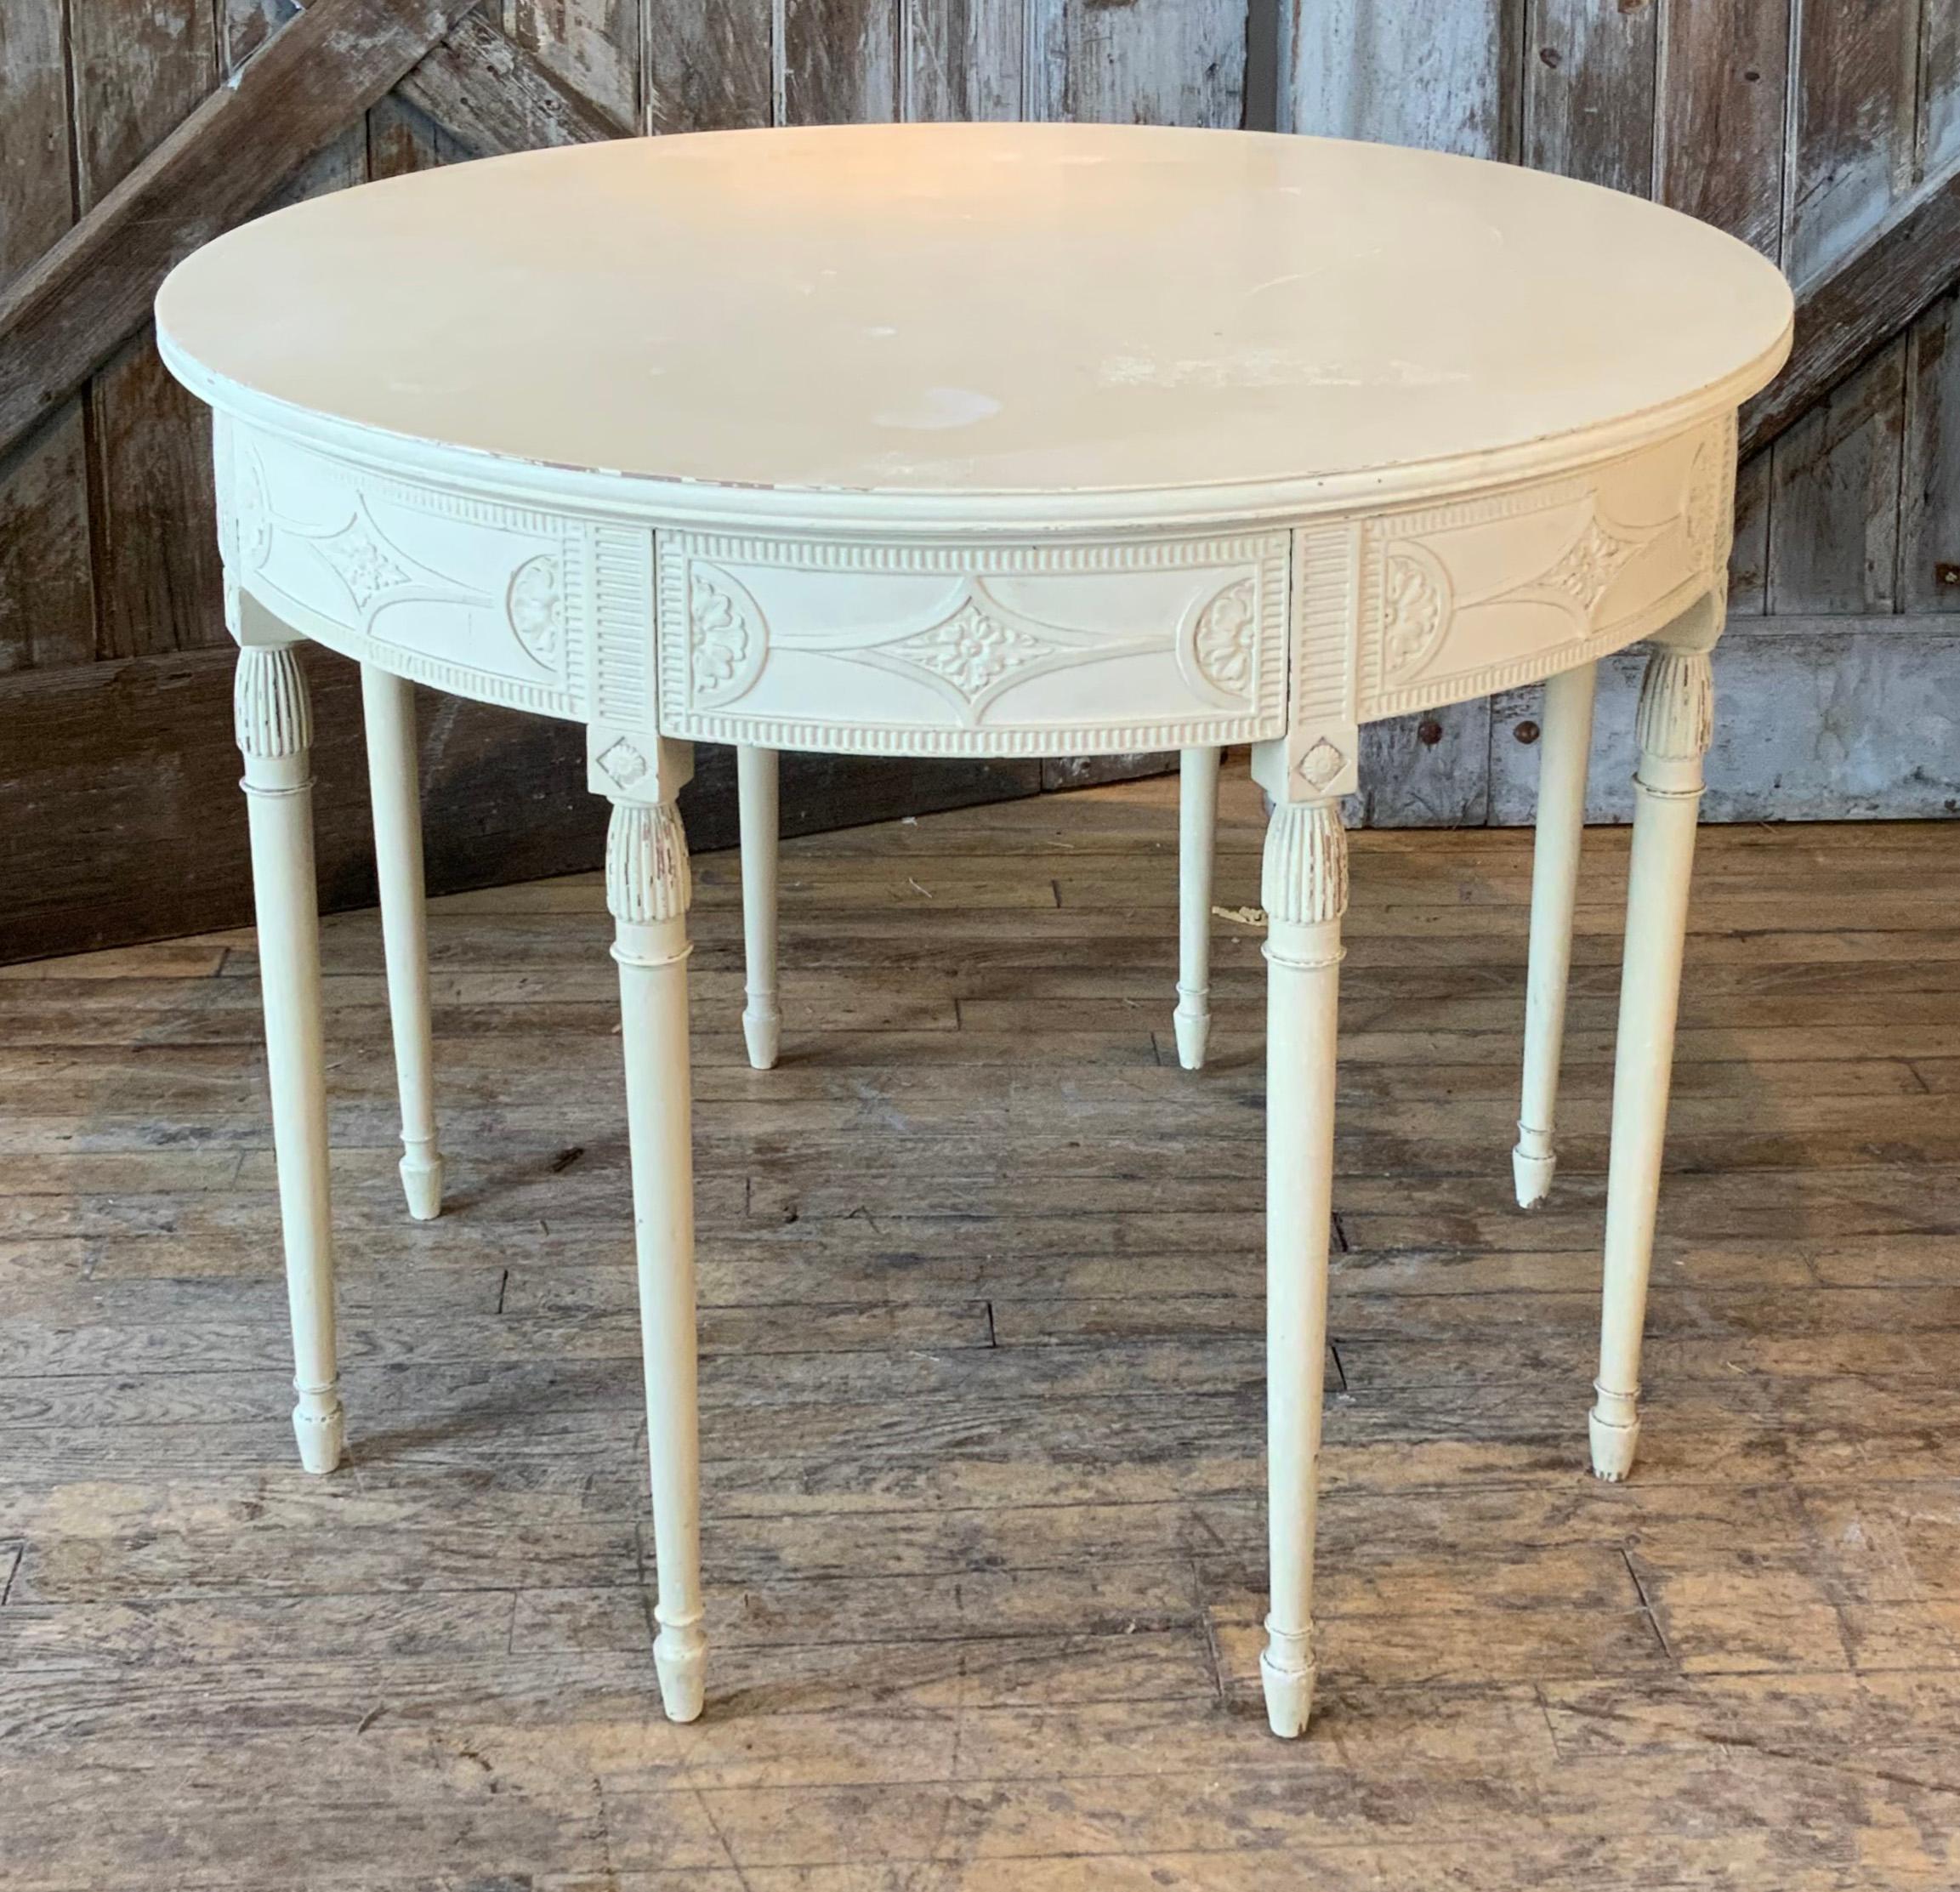 A spectacular late 19th century four drawer round center table designed for the Harold Brown Villa in Newport RI by Ogden Codman, and made by A.H. Davenport. Beautiful scale and with very nicely carved details and patterns, the round table featured